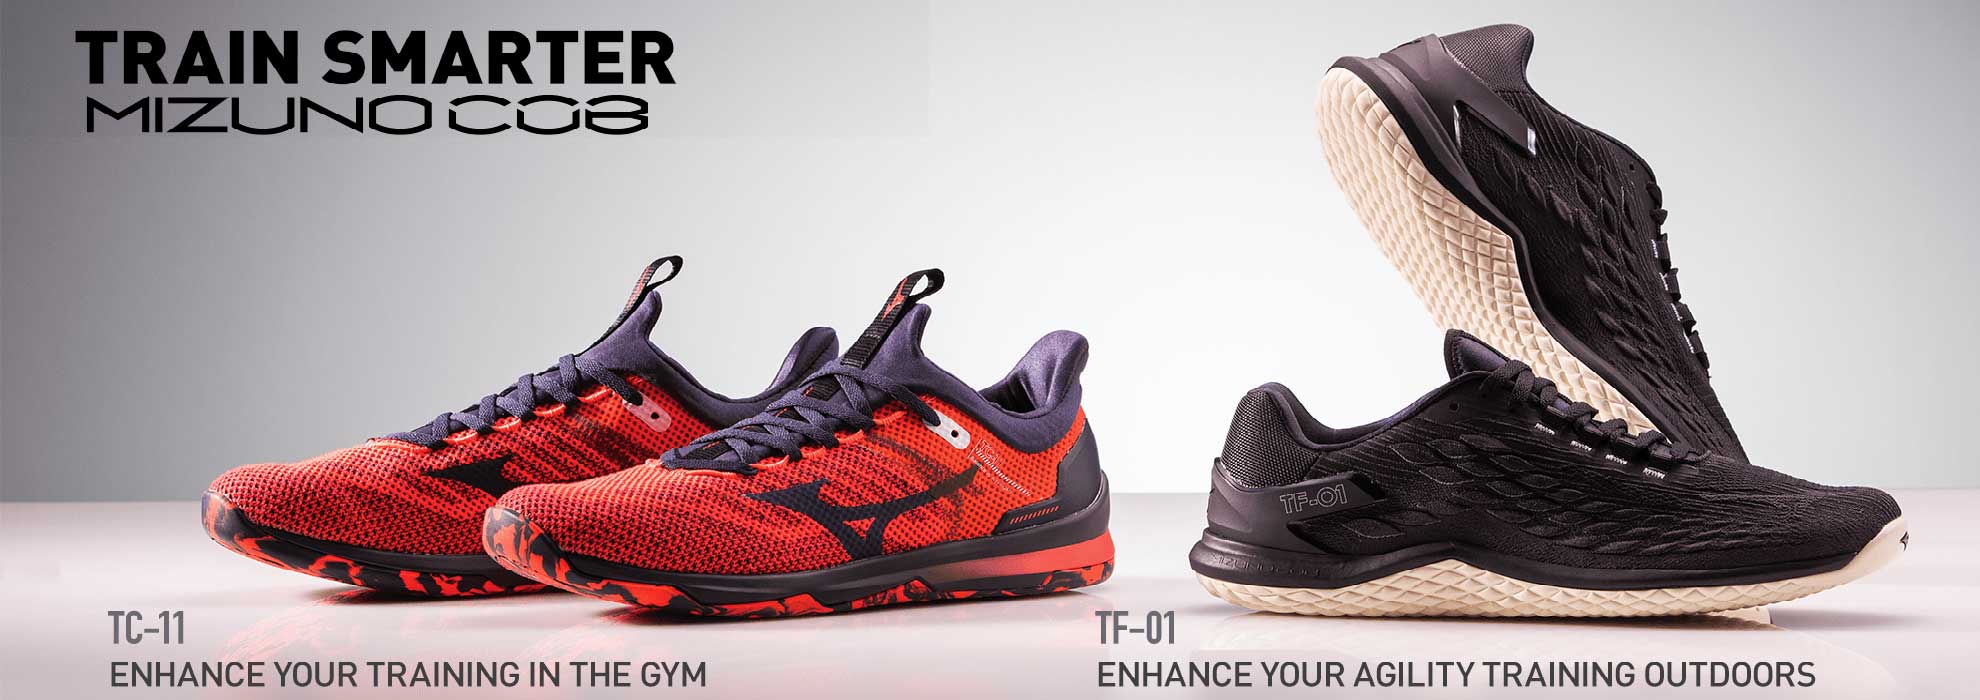 TC-11 indoor training shoes and the TF-01 outdoor training shoes